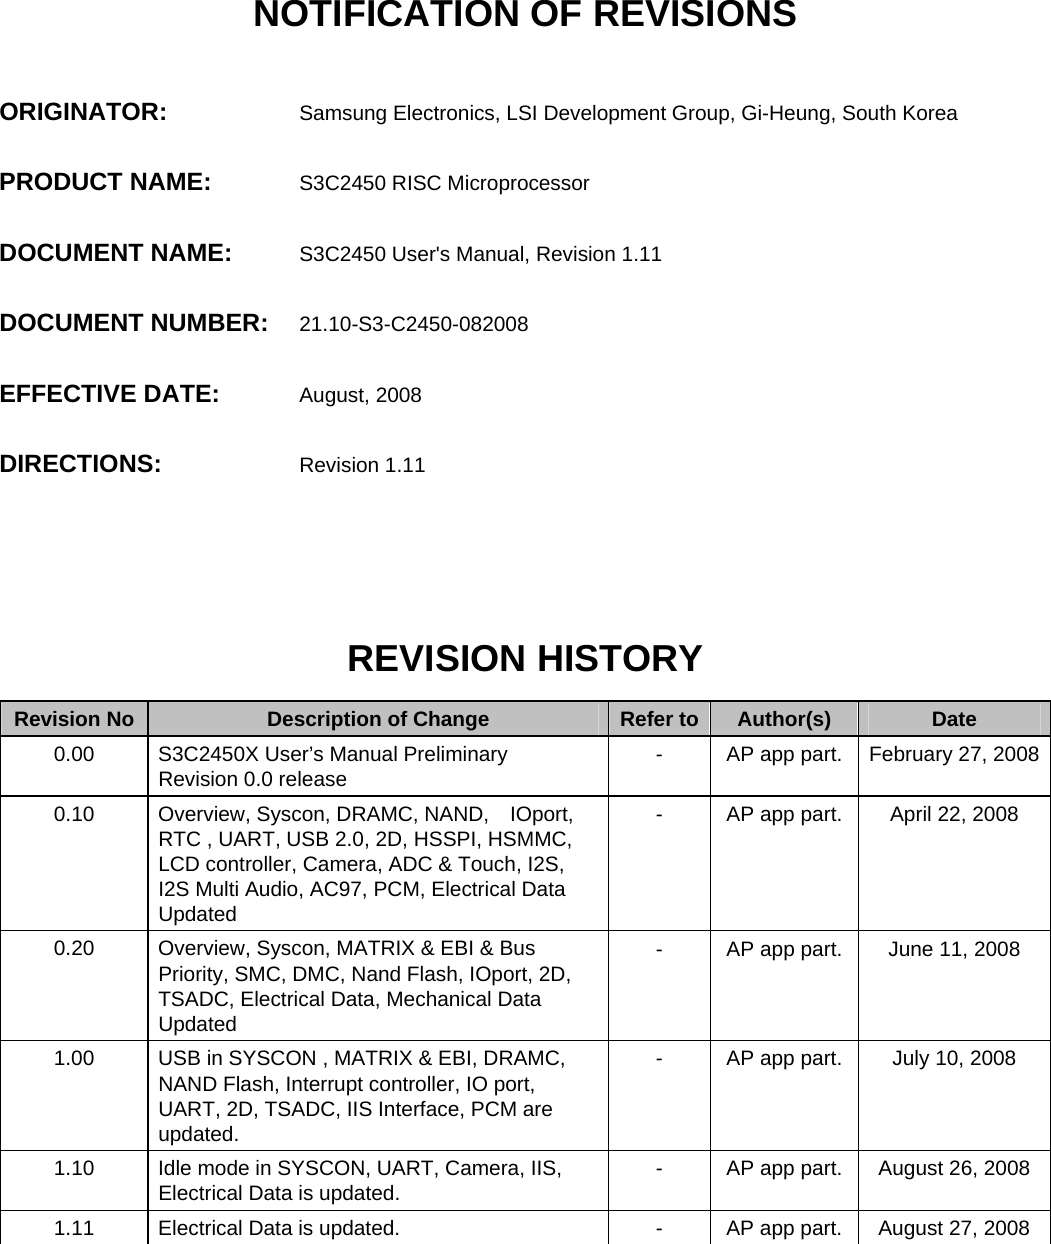 NOTIFICATION OF REVISIONS ORIGINATOR:  Samsung Electronics, LSI Development Group, Gi-Heung, South Korea PRODUCT NAME:     S3C2450 RISC Microprocessor DOCUMENT NAME:  S3C2450 User&apos;s Manual, Revision 1.11 DOCUMENT NUMBER:   21.10-S3-C2450-082008 EFFECTIVE DATE:     August, 2008 DIRECTIONS:  Revision 1.11    REVISION HISTORY Revision No  Description of Change  Refer to Author(s)  Date 0.00  S3C2450X User’s Manual Preliminary   Revision 0.0 release  -  AP app part.  February 27, 20080.10  Overview, Syscon, DRAMC, NAND,    IOport, RTC , UART, USB 2.0, 2D, HSSPI, HSMMC, LCD controller, Camera, ADC &amp; Touch, I2S,   I2S Multi Audio, AC97, PCM, Electrical Data   Updated -  AP app part.  April 22, 2008 0.20  Overview, Syscon, MATRIX &amp; EBI &amp; Bus Priority, SMC, DMC, Nand Flash, IOport, 2D, TSADC, Electrical Data, Mechanical Data Updated -  AP app part.  June 11, 2008  1.00  USB in SYSCON , MATRIX &amp; EBI, DRAMC, NAND Flash, Interrupt controller, IO port, UART, 2D, TSADC, IIS Interface, PCM are updated. -  AP app part.  July 10, 2008 1.10  Idle mode in SYSCON, UART, Camera, IIS, Electrical Data is updated.  -  AP app part.  August 26, 2008 1.11  Electrical Data is updated.  -  AP app part.  August 27, 2008  